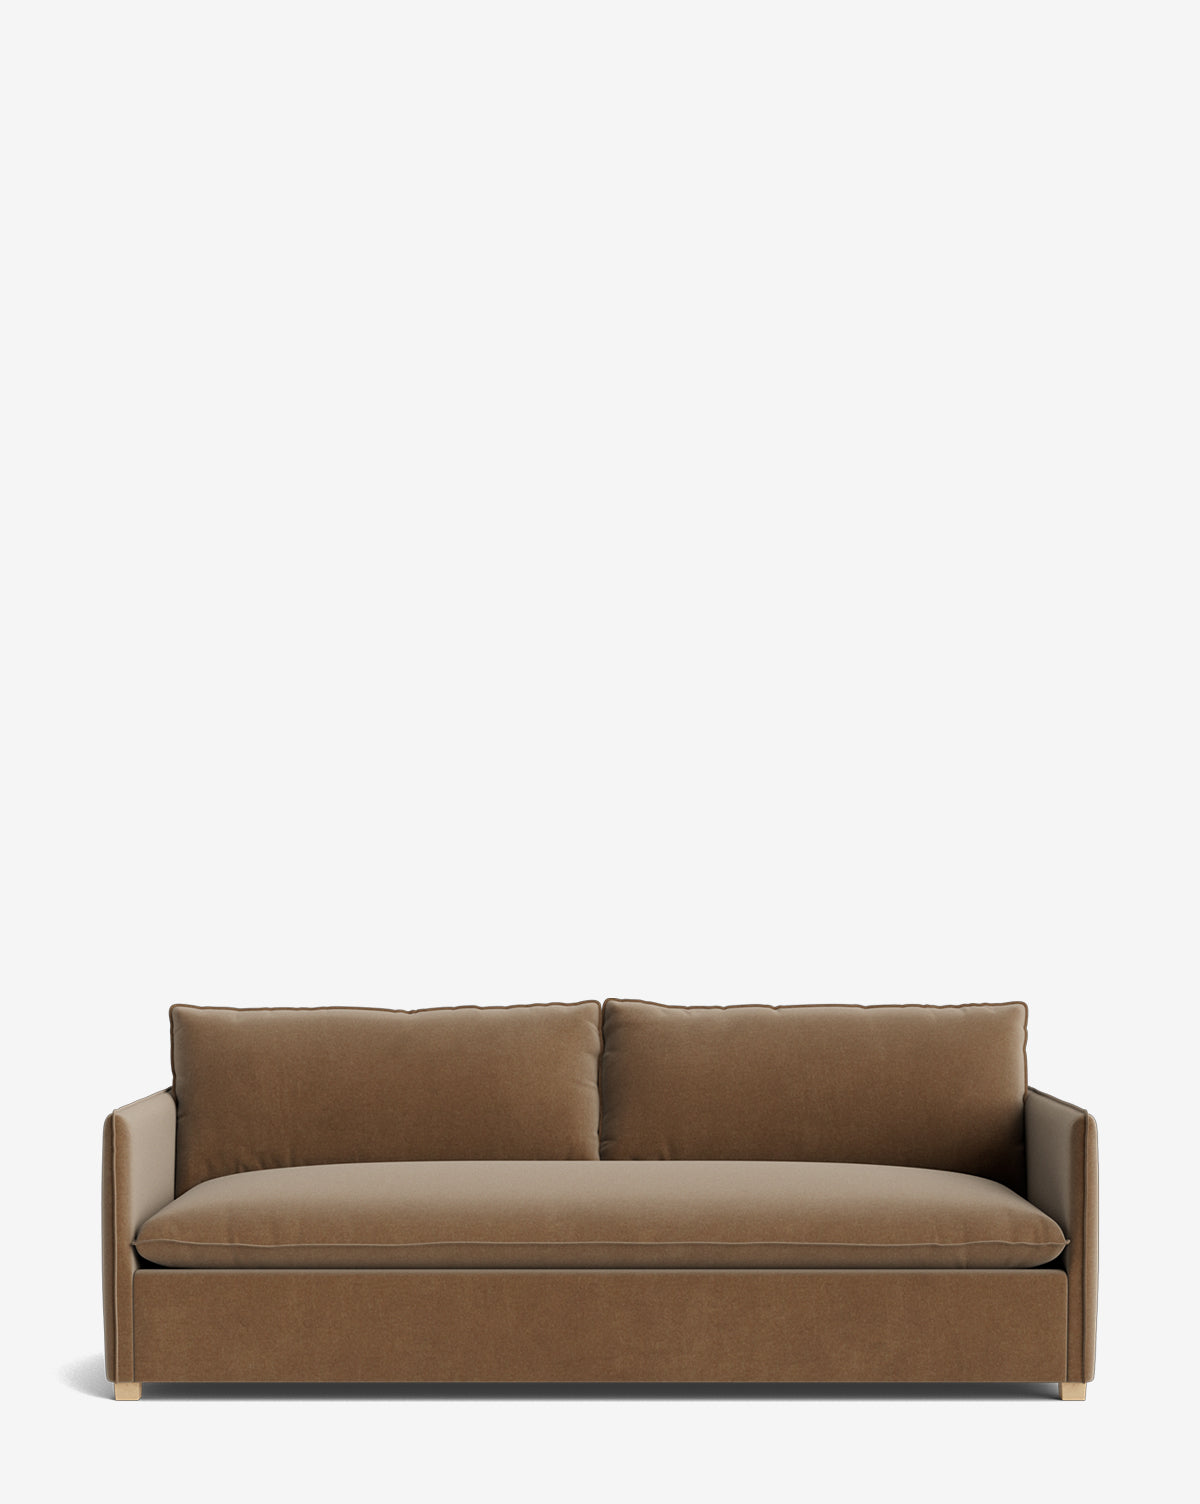 Rowe Fine Furniture, Monclair Upholstered Sofa